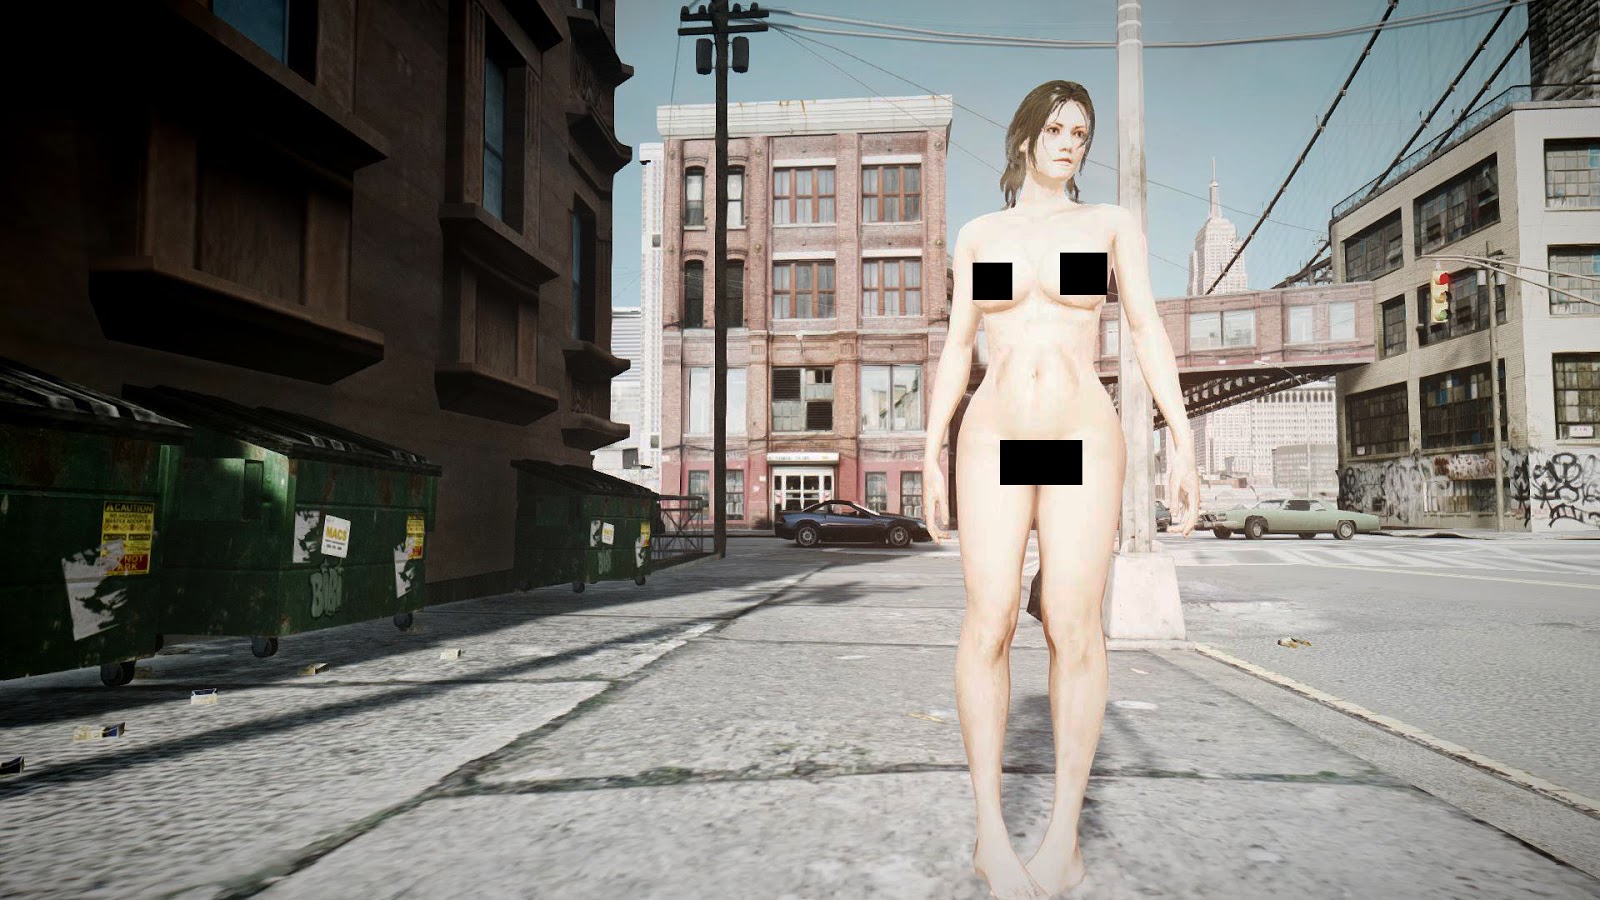 Naked girl in grand theft auto